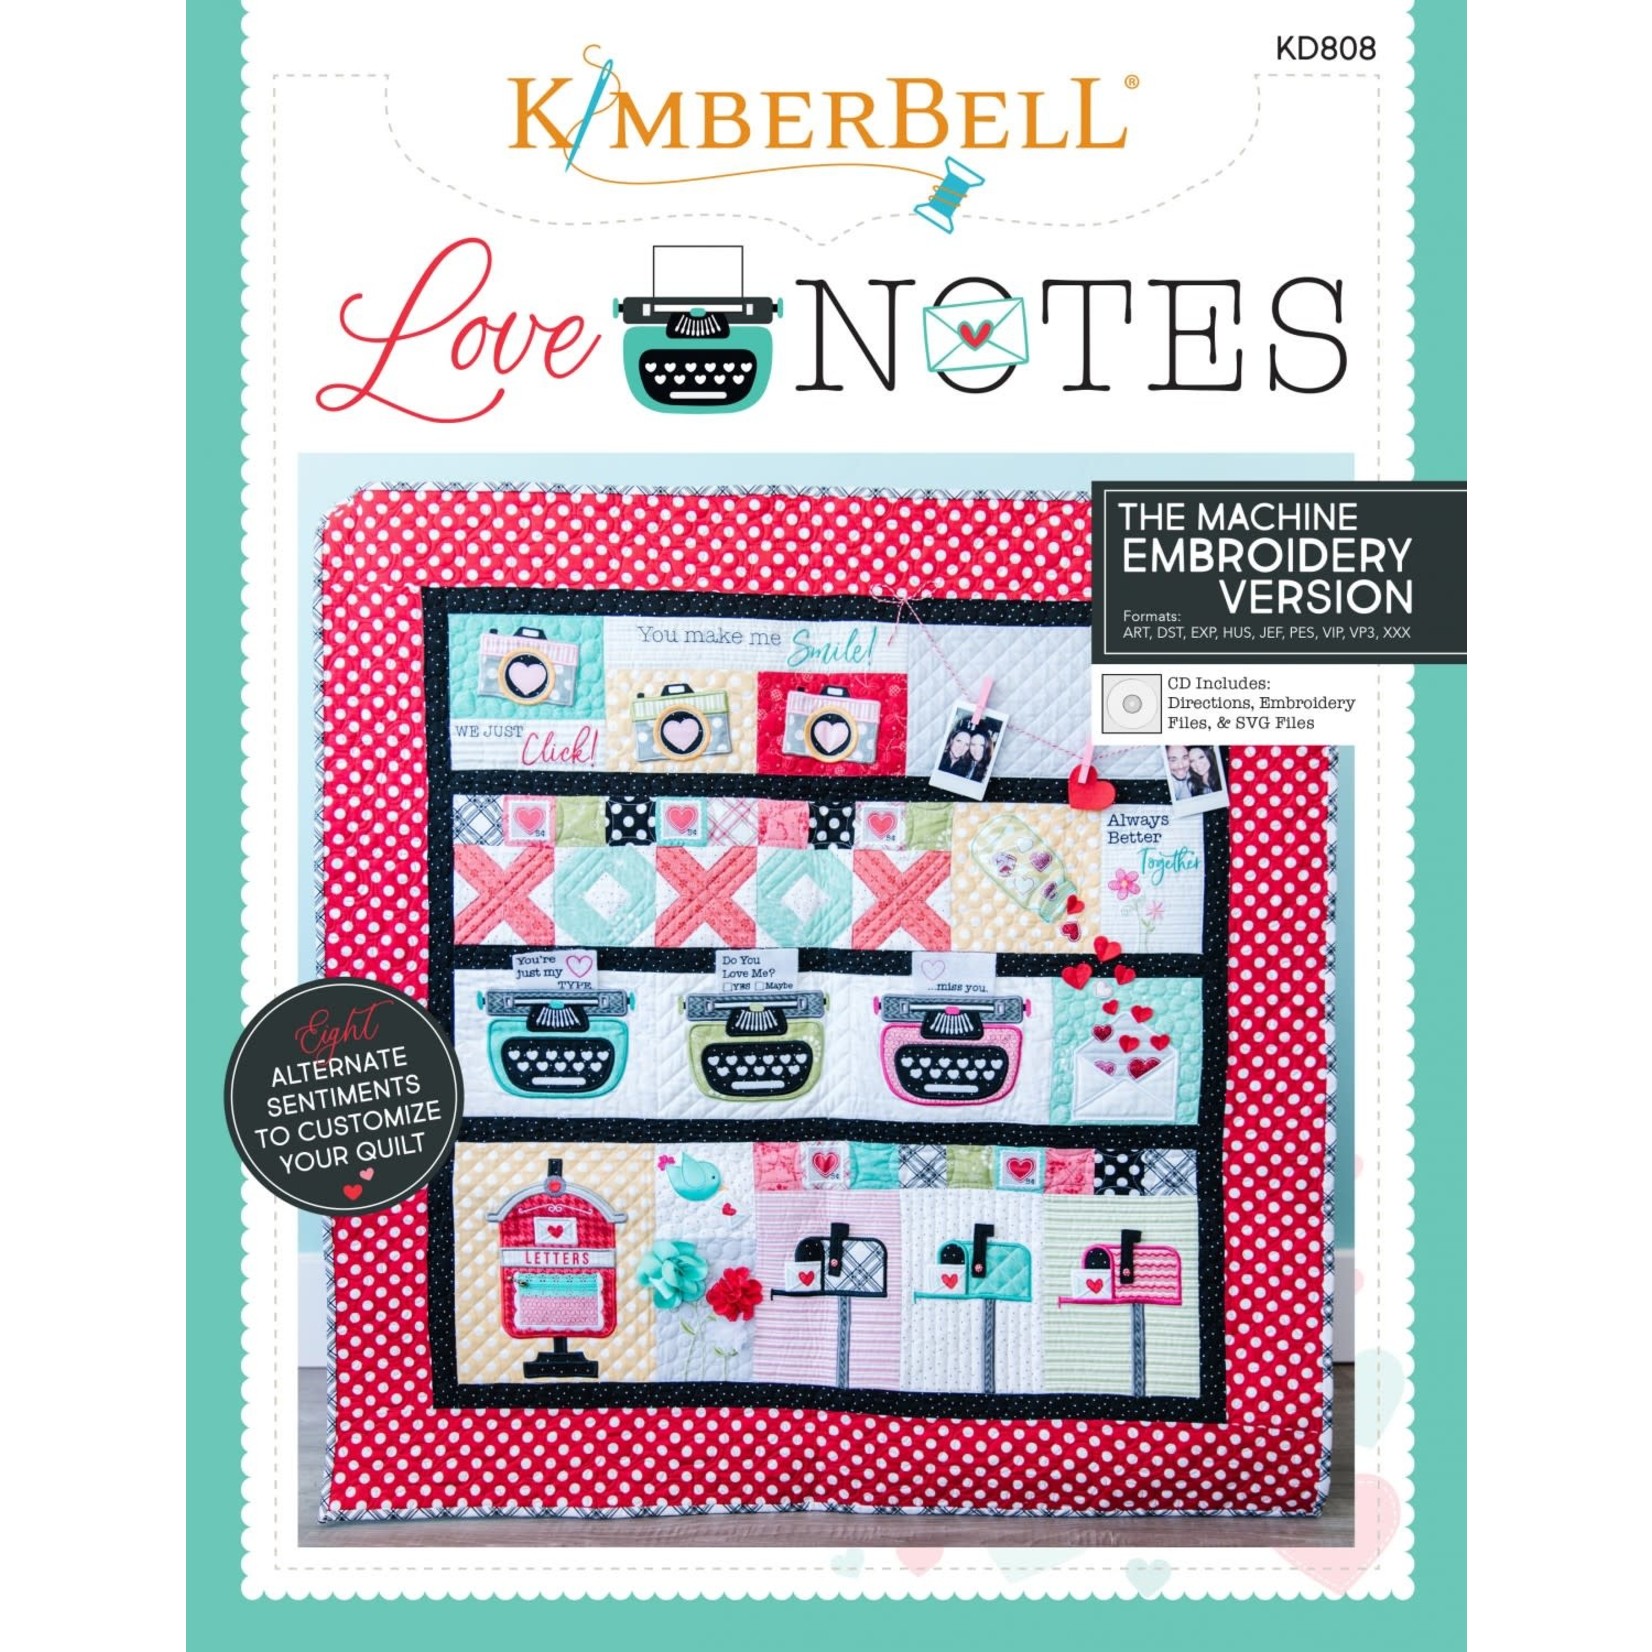 Download Love Notes Mystery Quilt Embroidery Stitch By Stitch